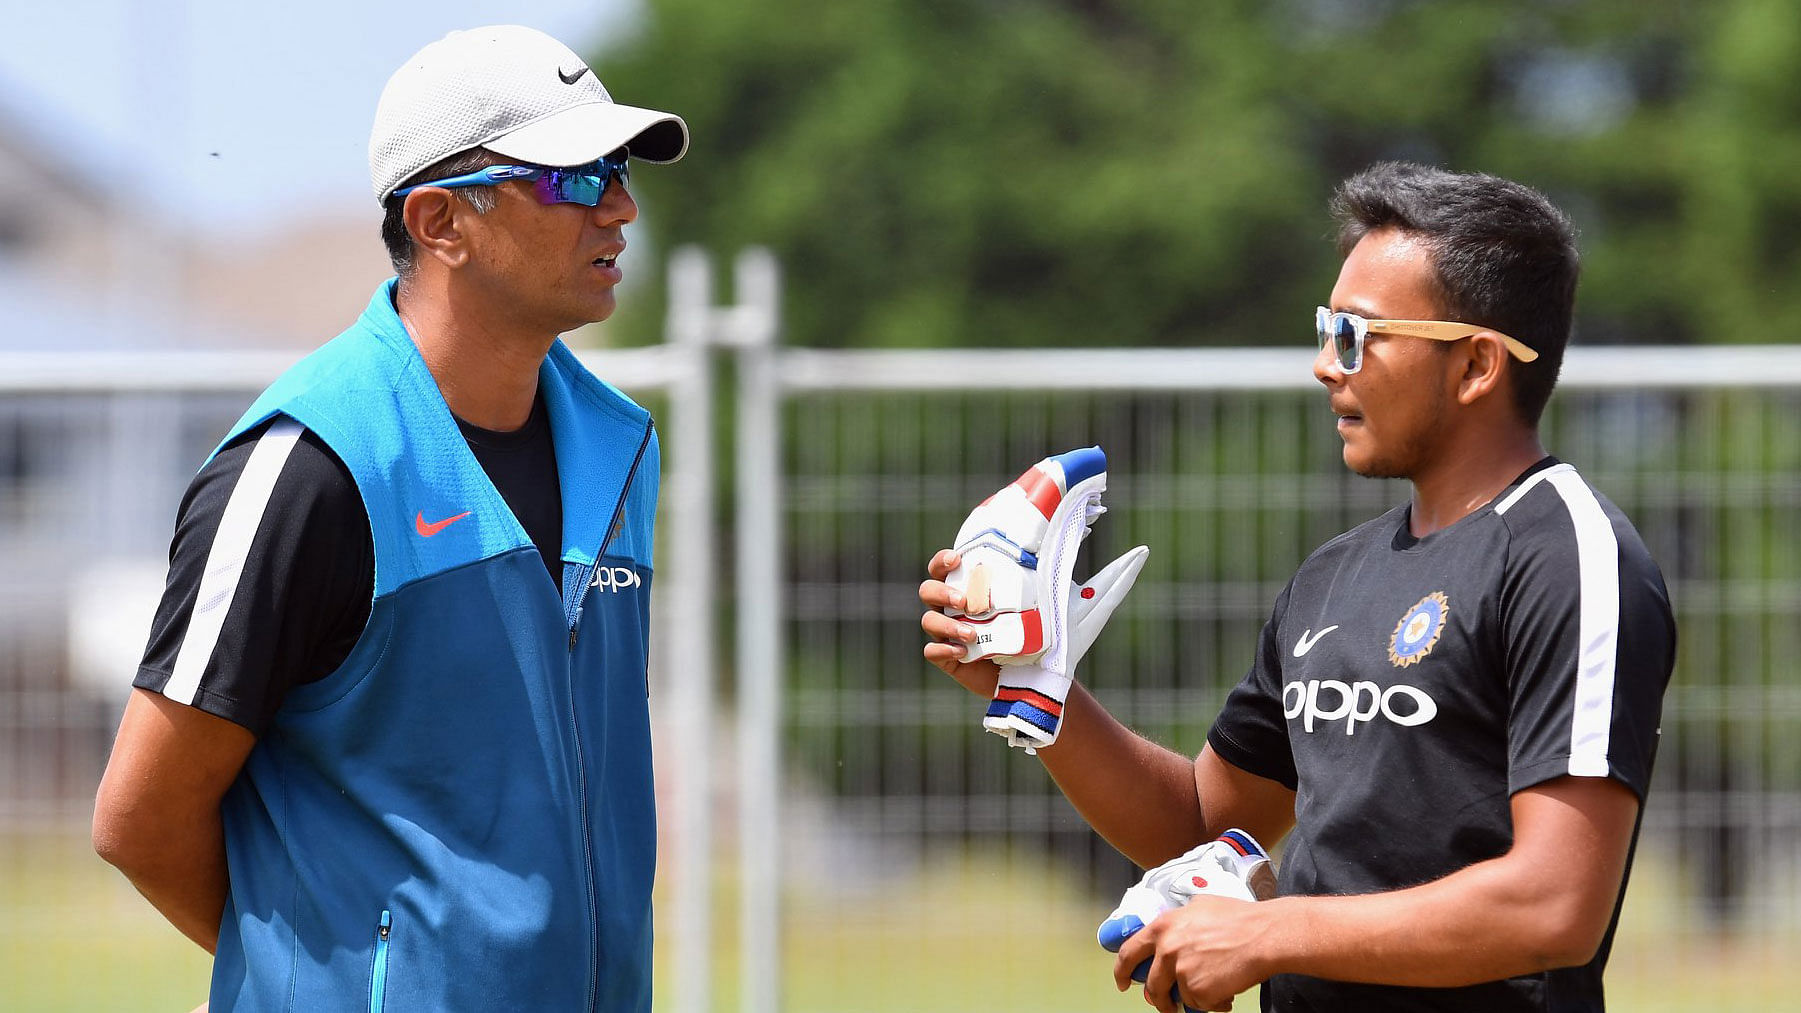 India U-19 coach Rahul Dravid and captain Prithvi Shaw have a chat during a practice session.